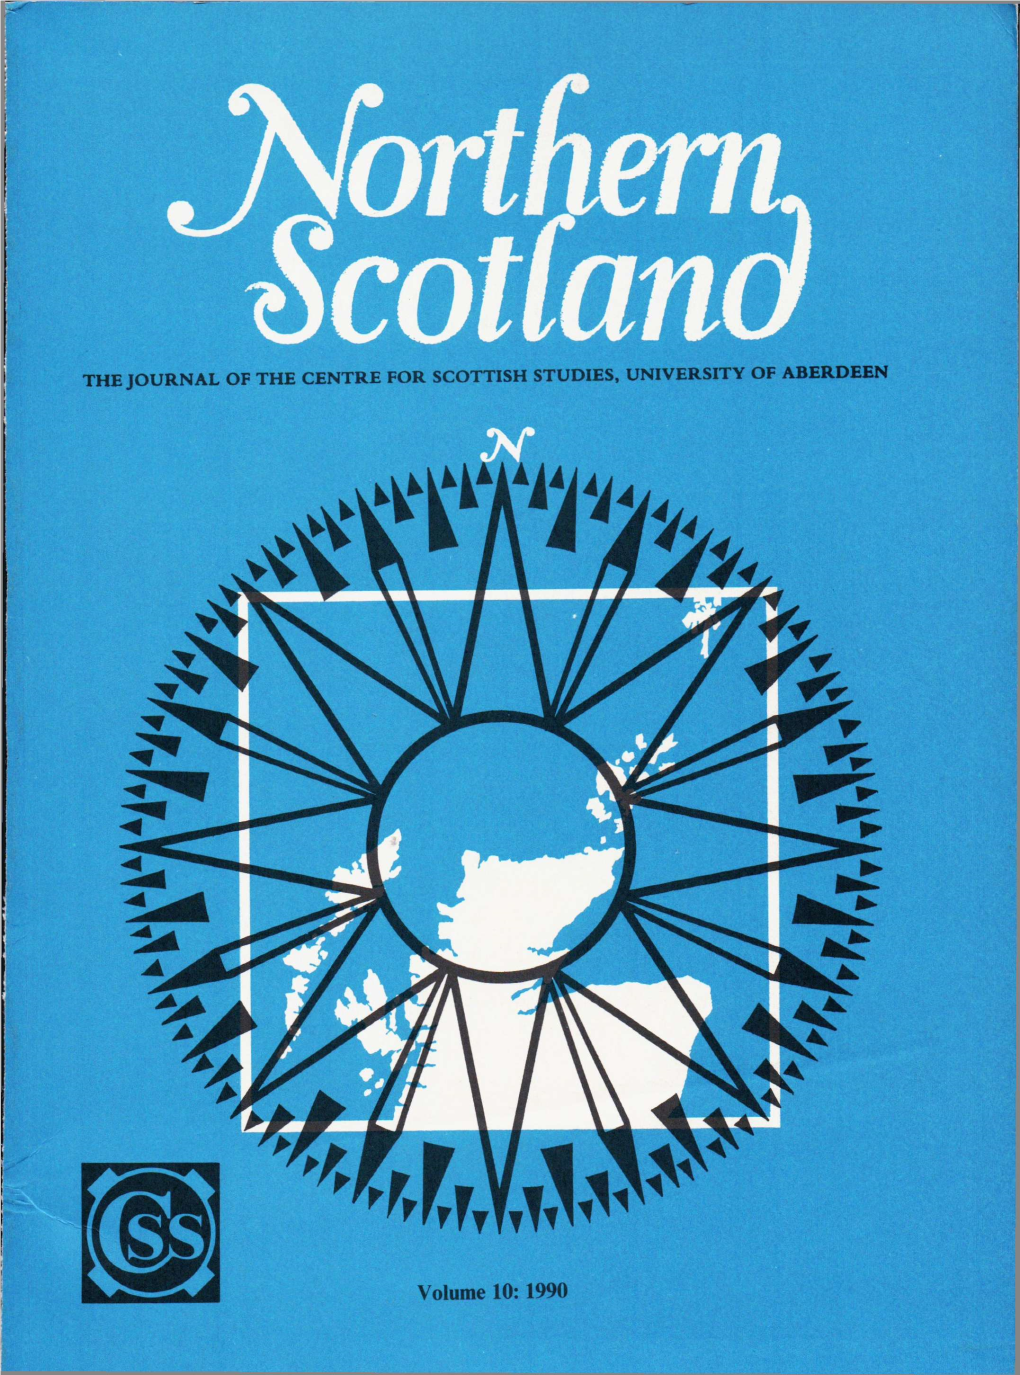 The Journal of the Centre for Scottish Studies, University of Aberdeen